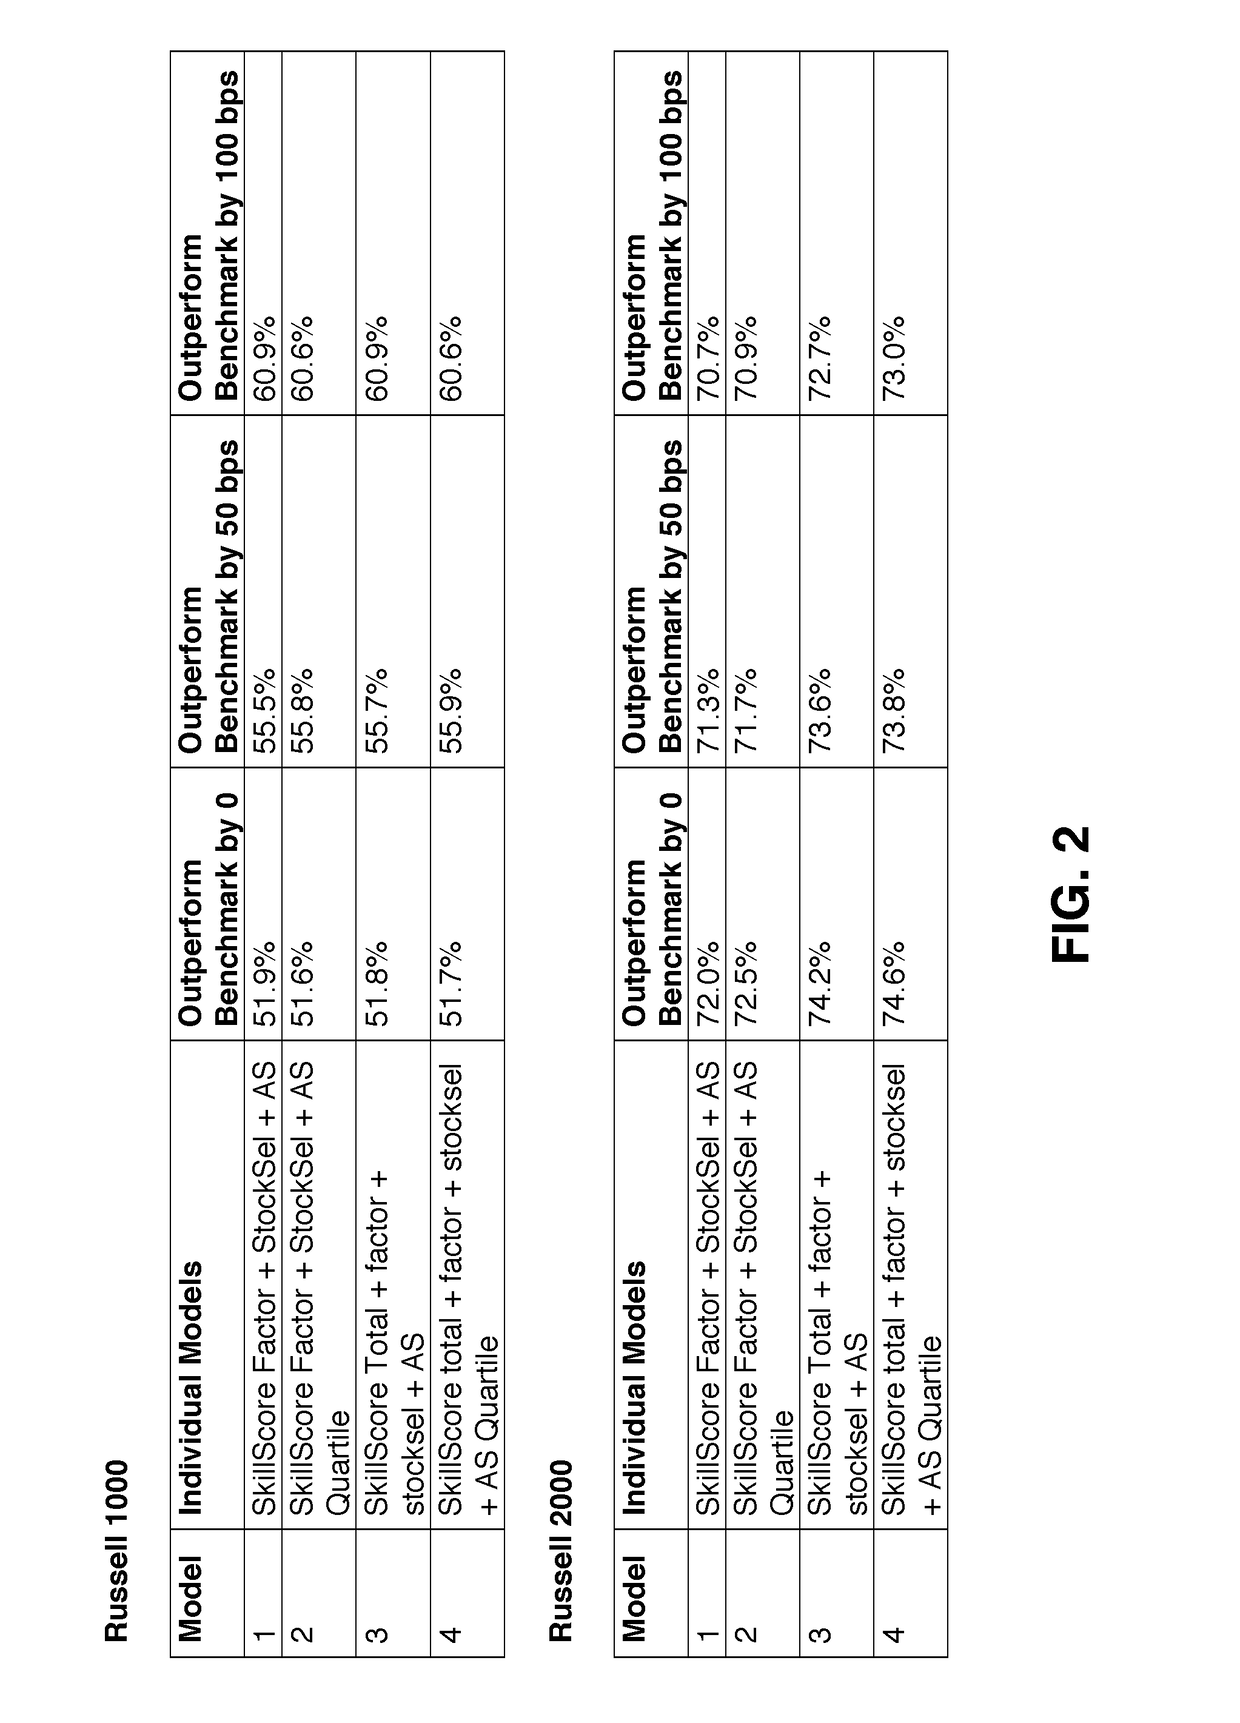 System and Method for Selecting Portfolio Managers and Products